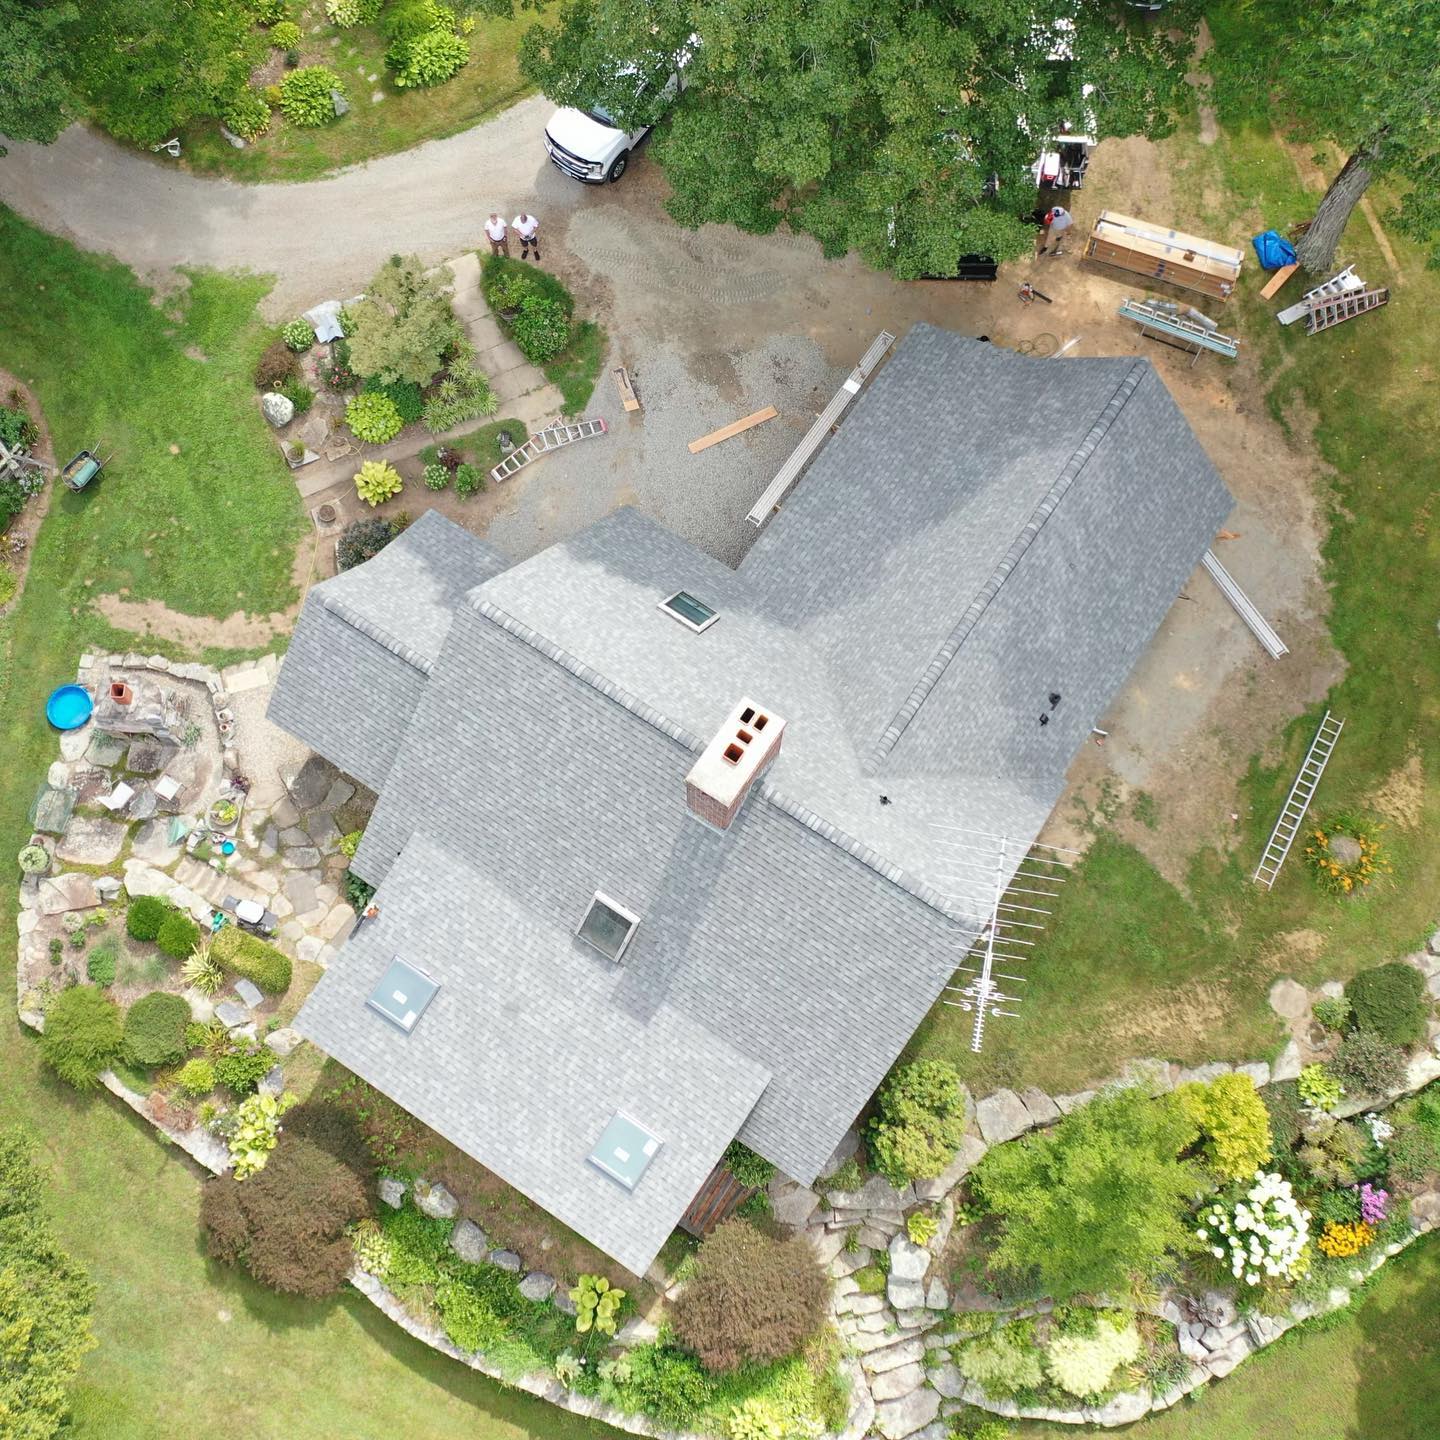 Lyme CT Roof Replacement 5 BP Builder Company in CT | Roofer, Roof Replacement, CT Roofing Company & General Contractor CT